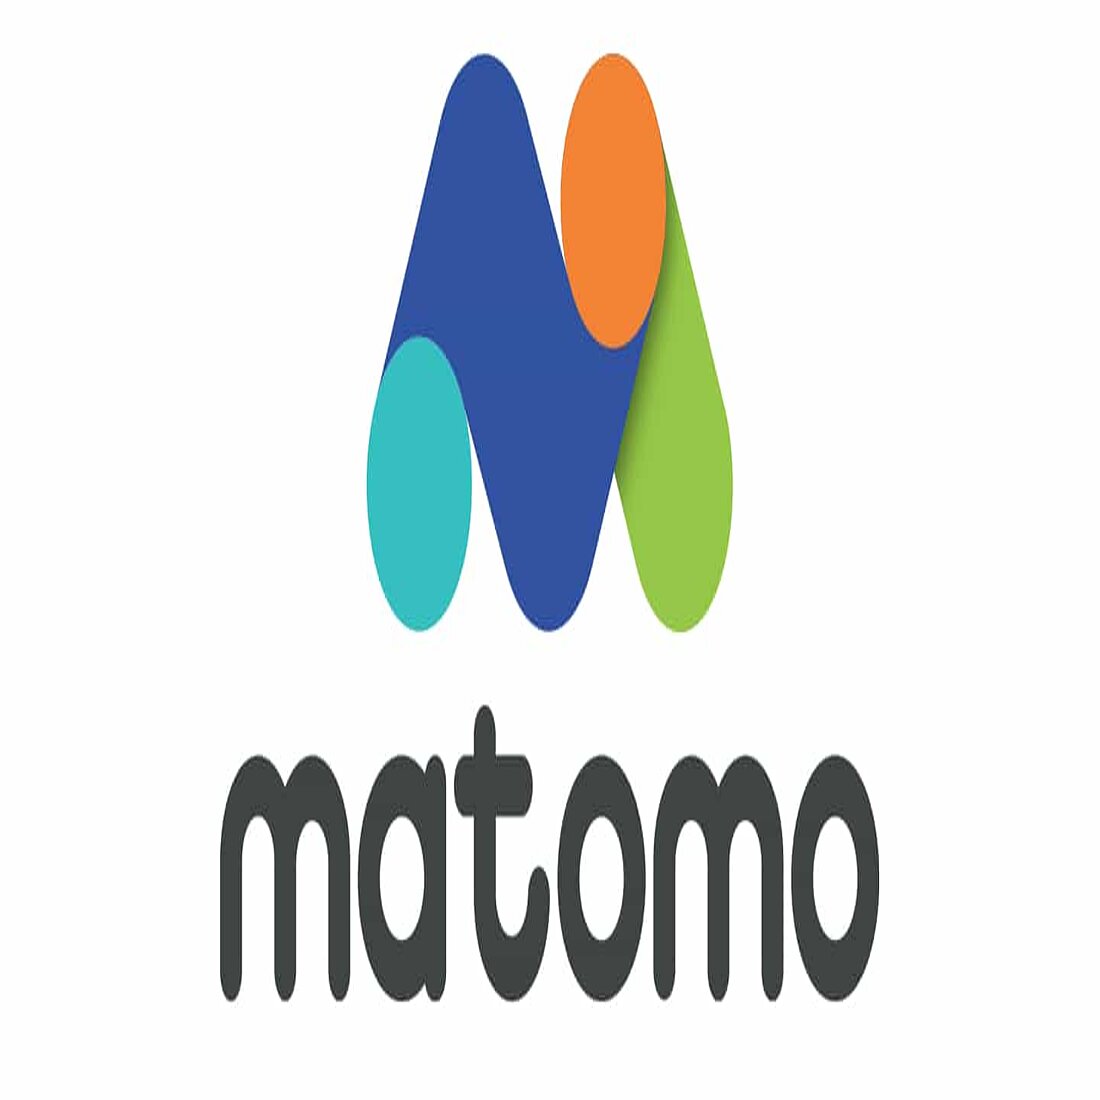 Matomo is one of the best privacy-perfect Wordpress analytics tools